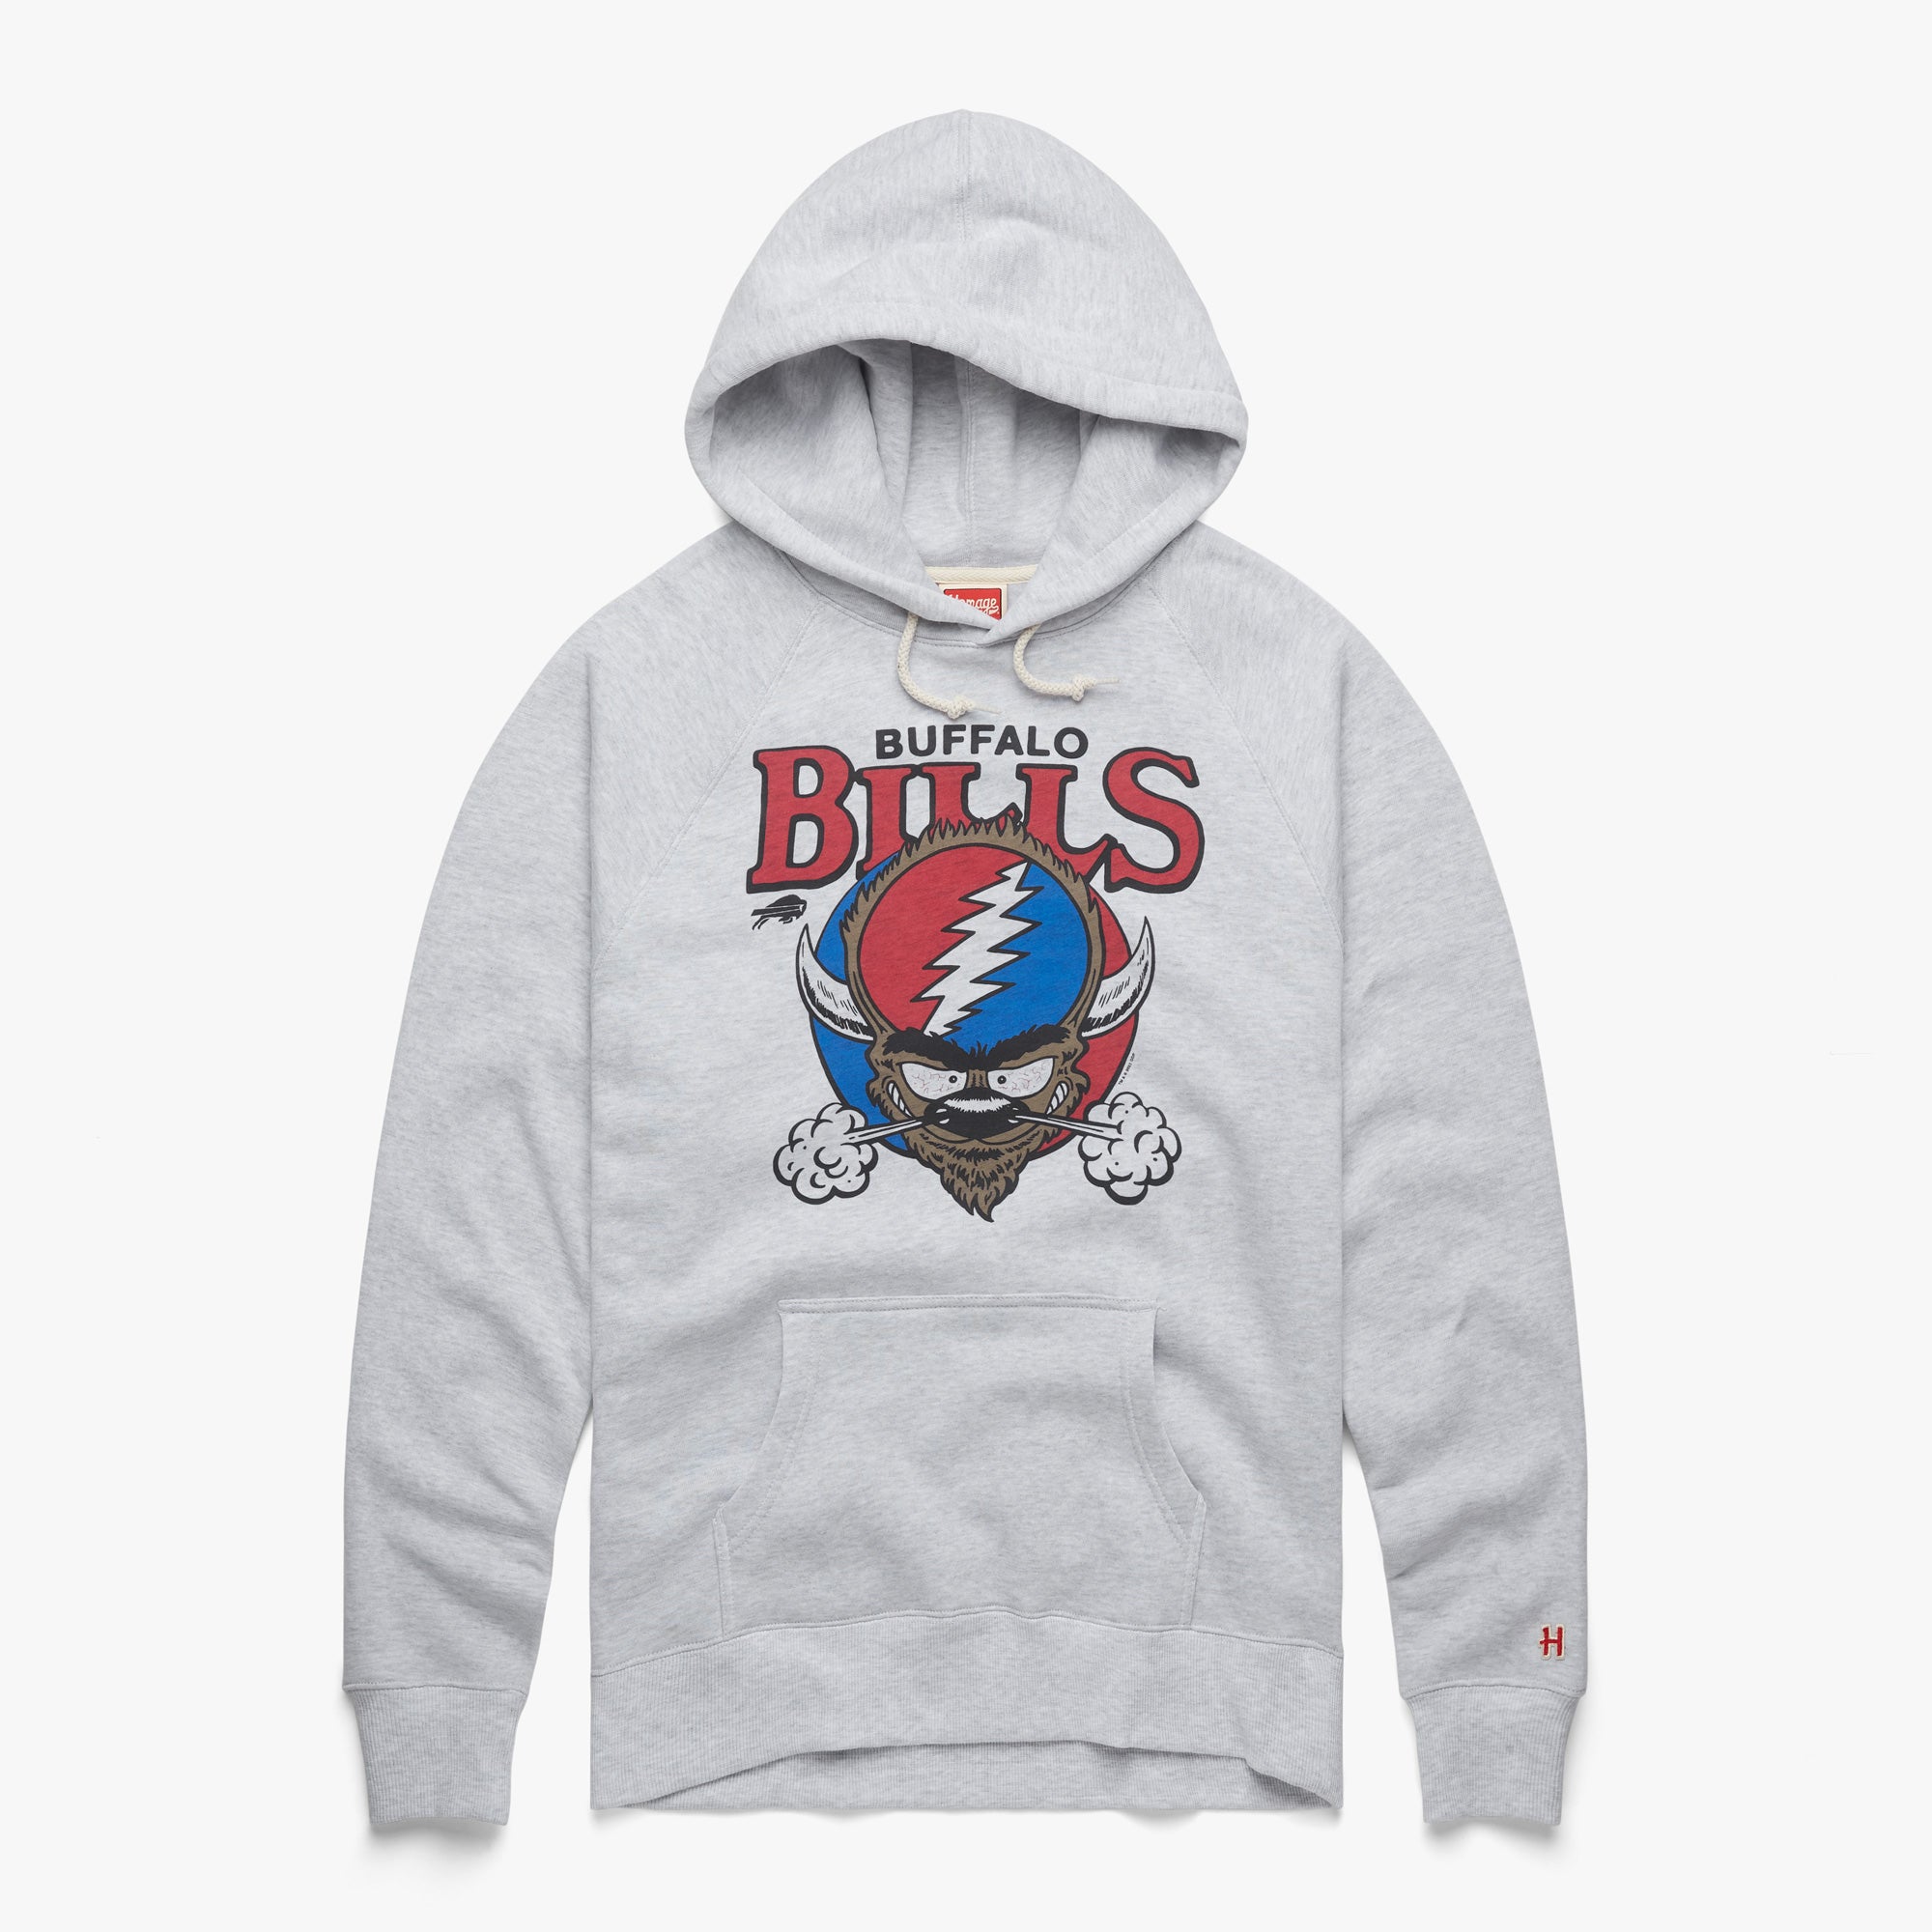 NFL x Grateful Dead x Buffalo Bills Hoodie from Homage. | Officially Licensed Vintage NFL Apparel from Homage Pro Shop.